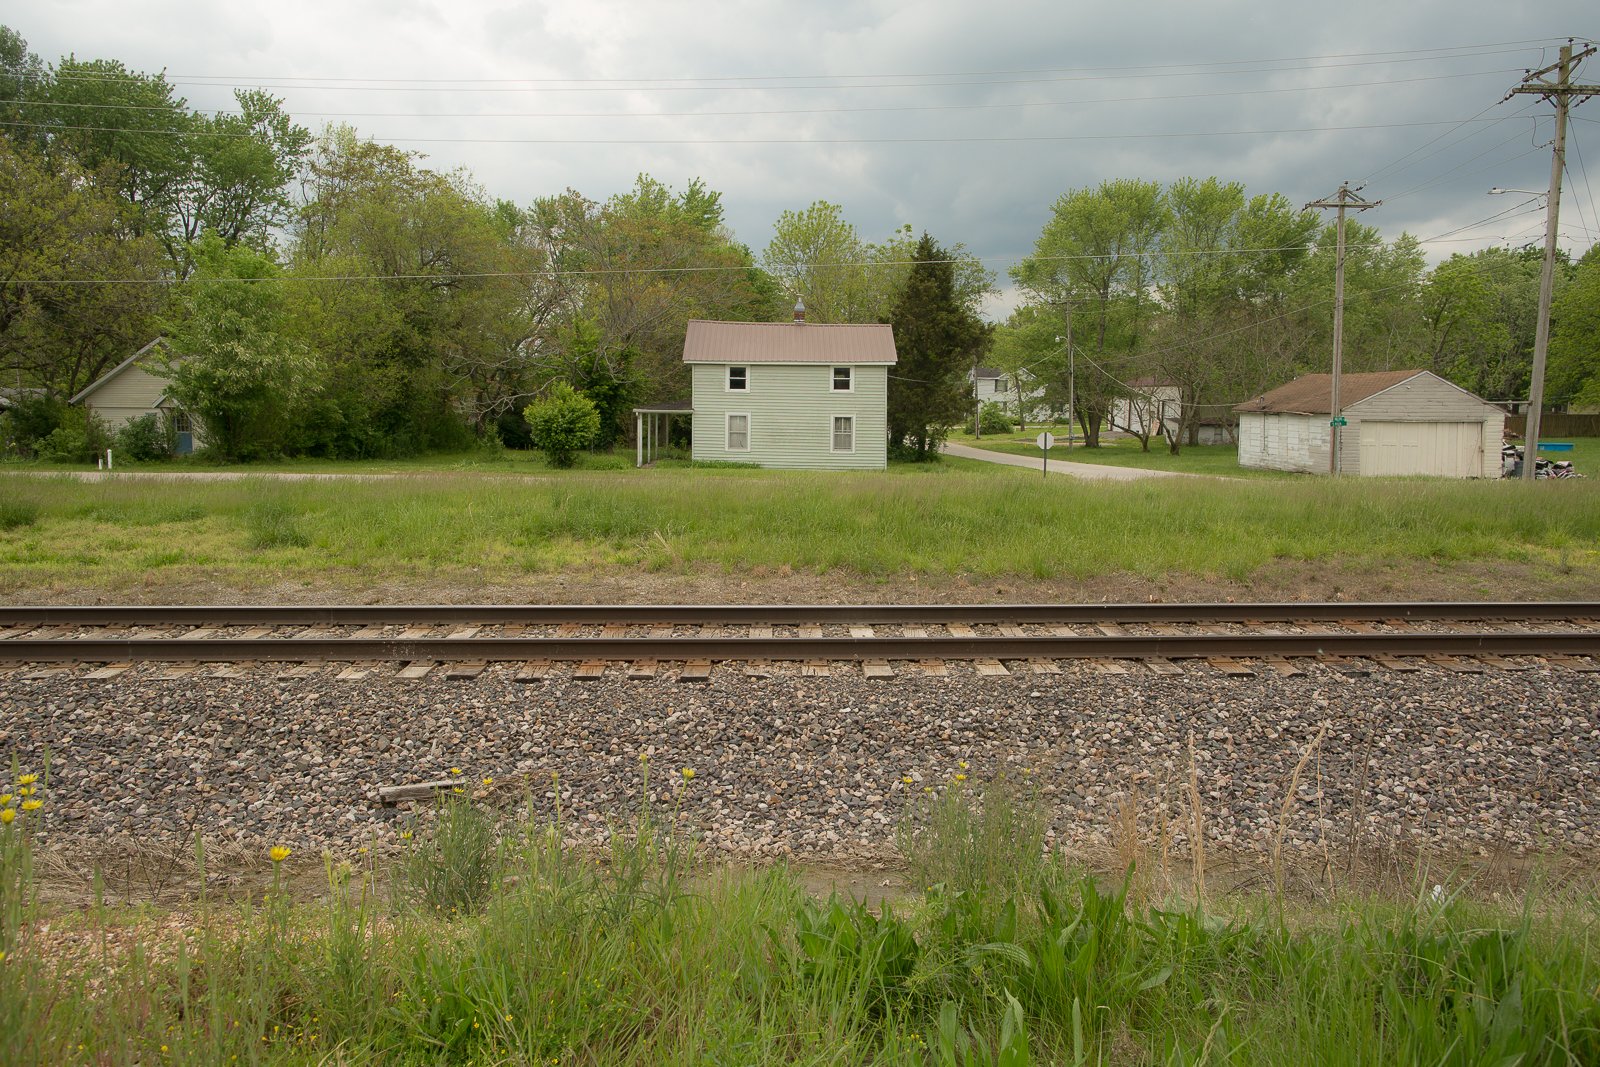 Railroad track with a white house and pink roof and cloudy sky in the distance